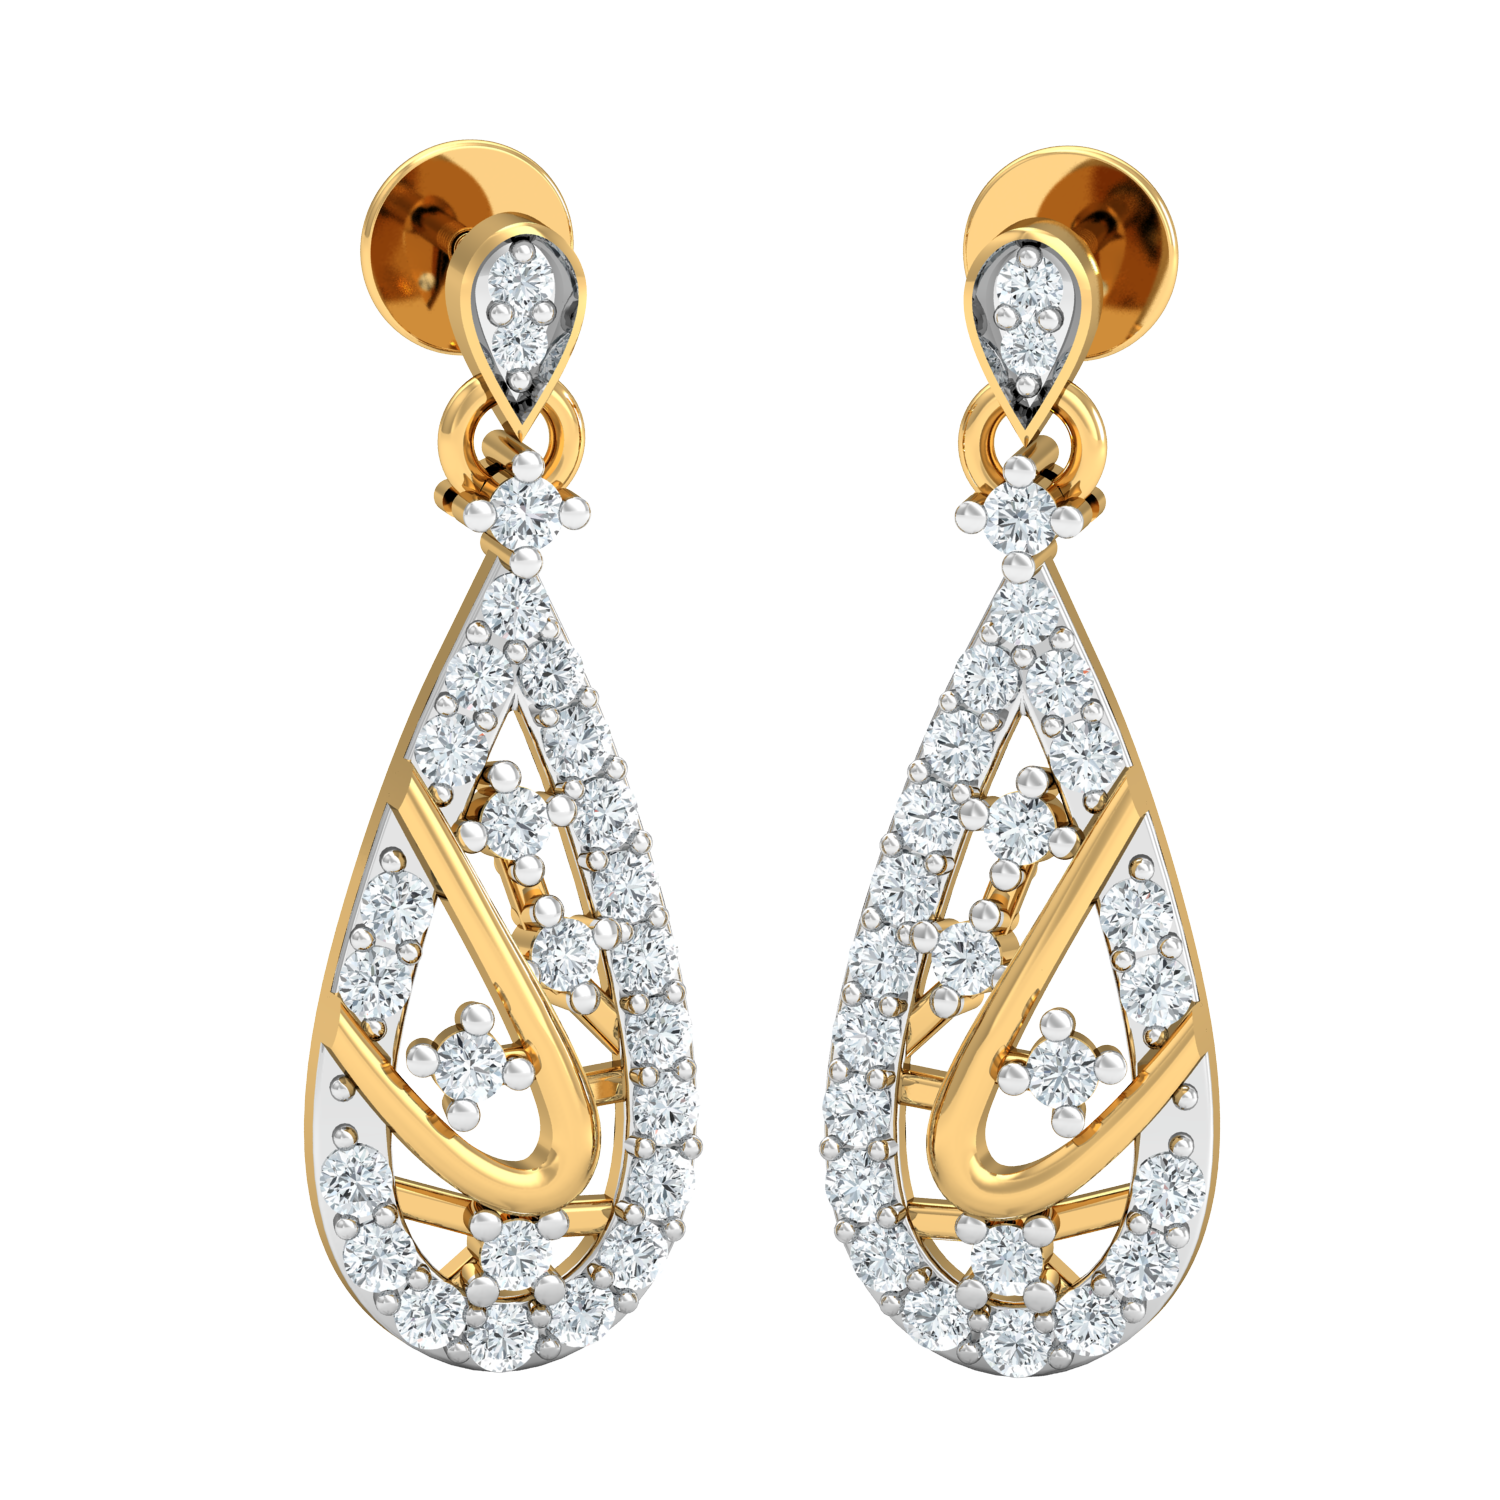 Discover 83+ diamond earrings rate in india latest - esthdonghoadian